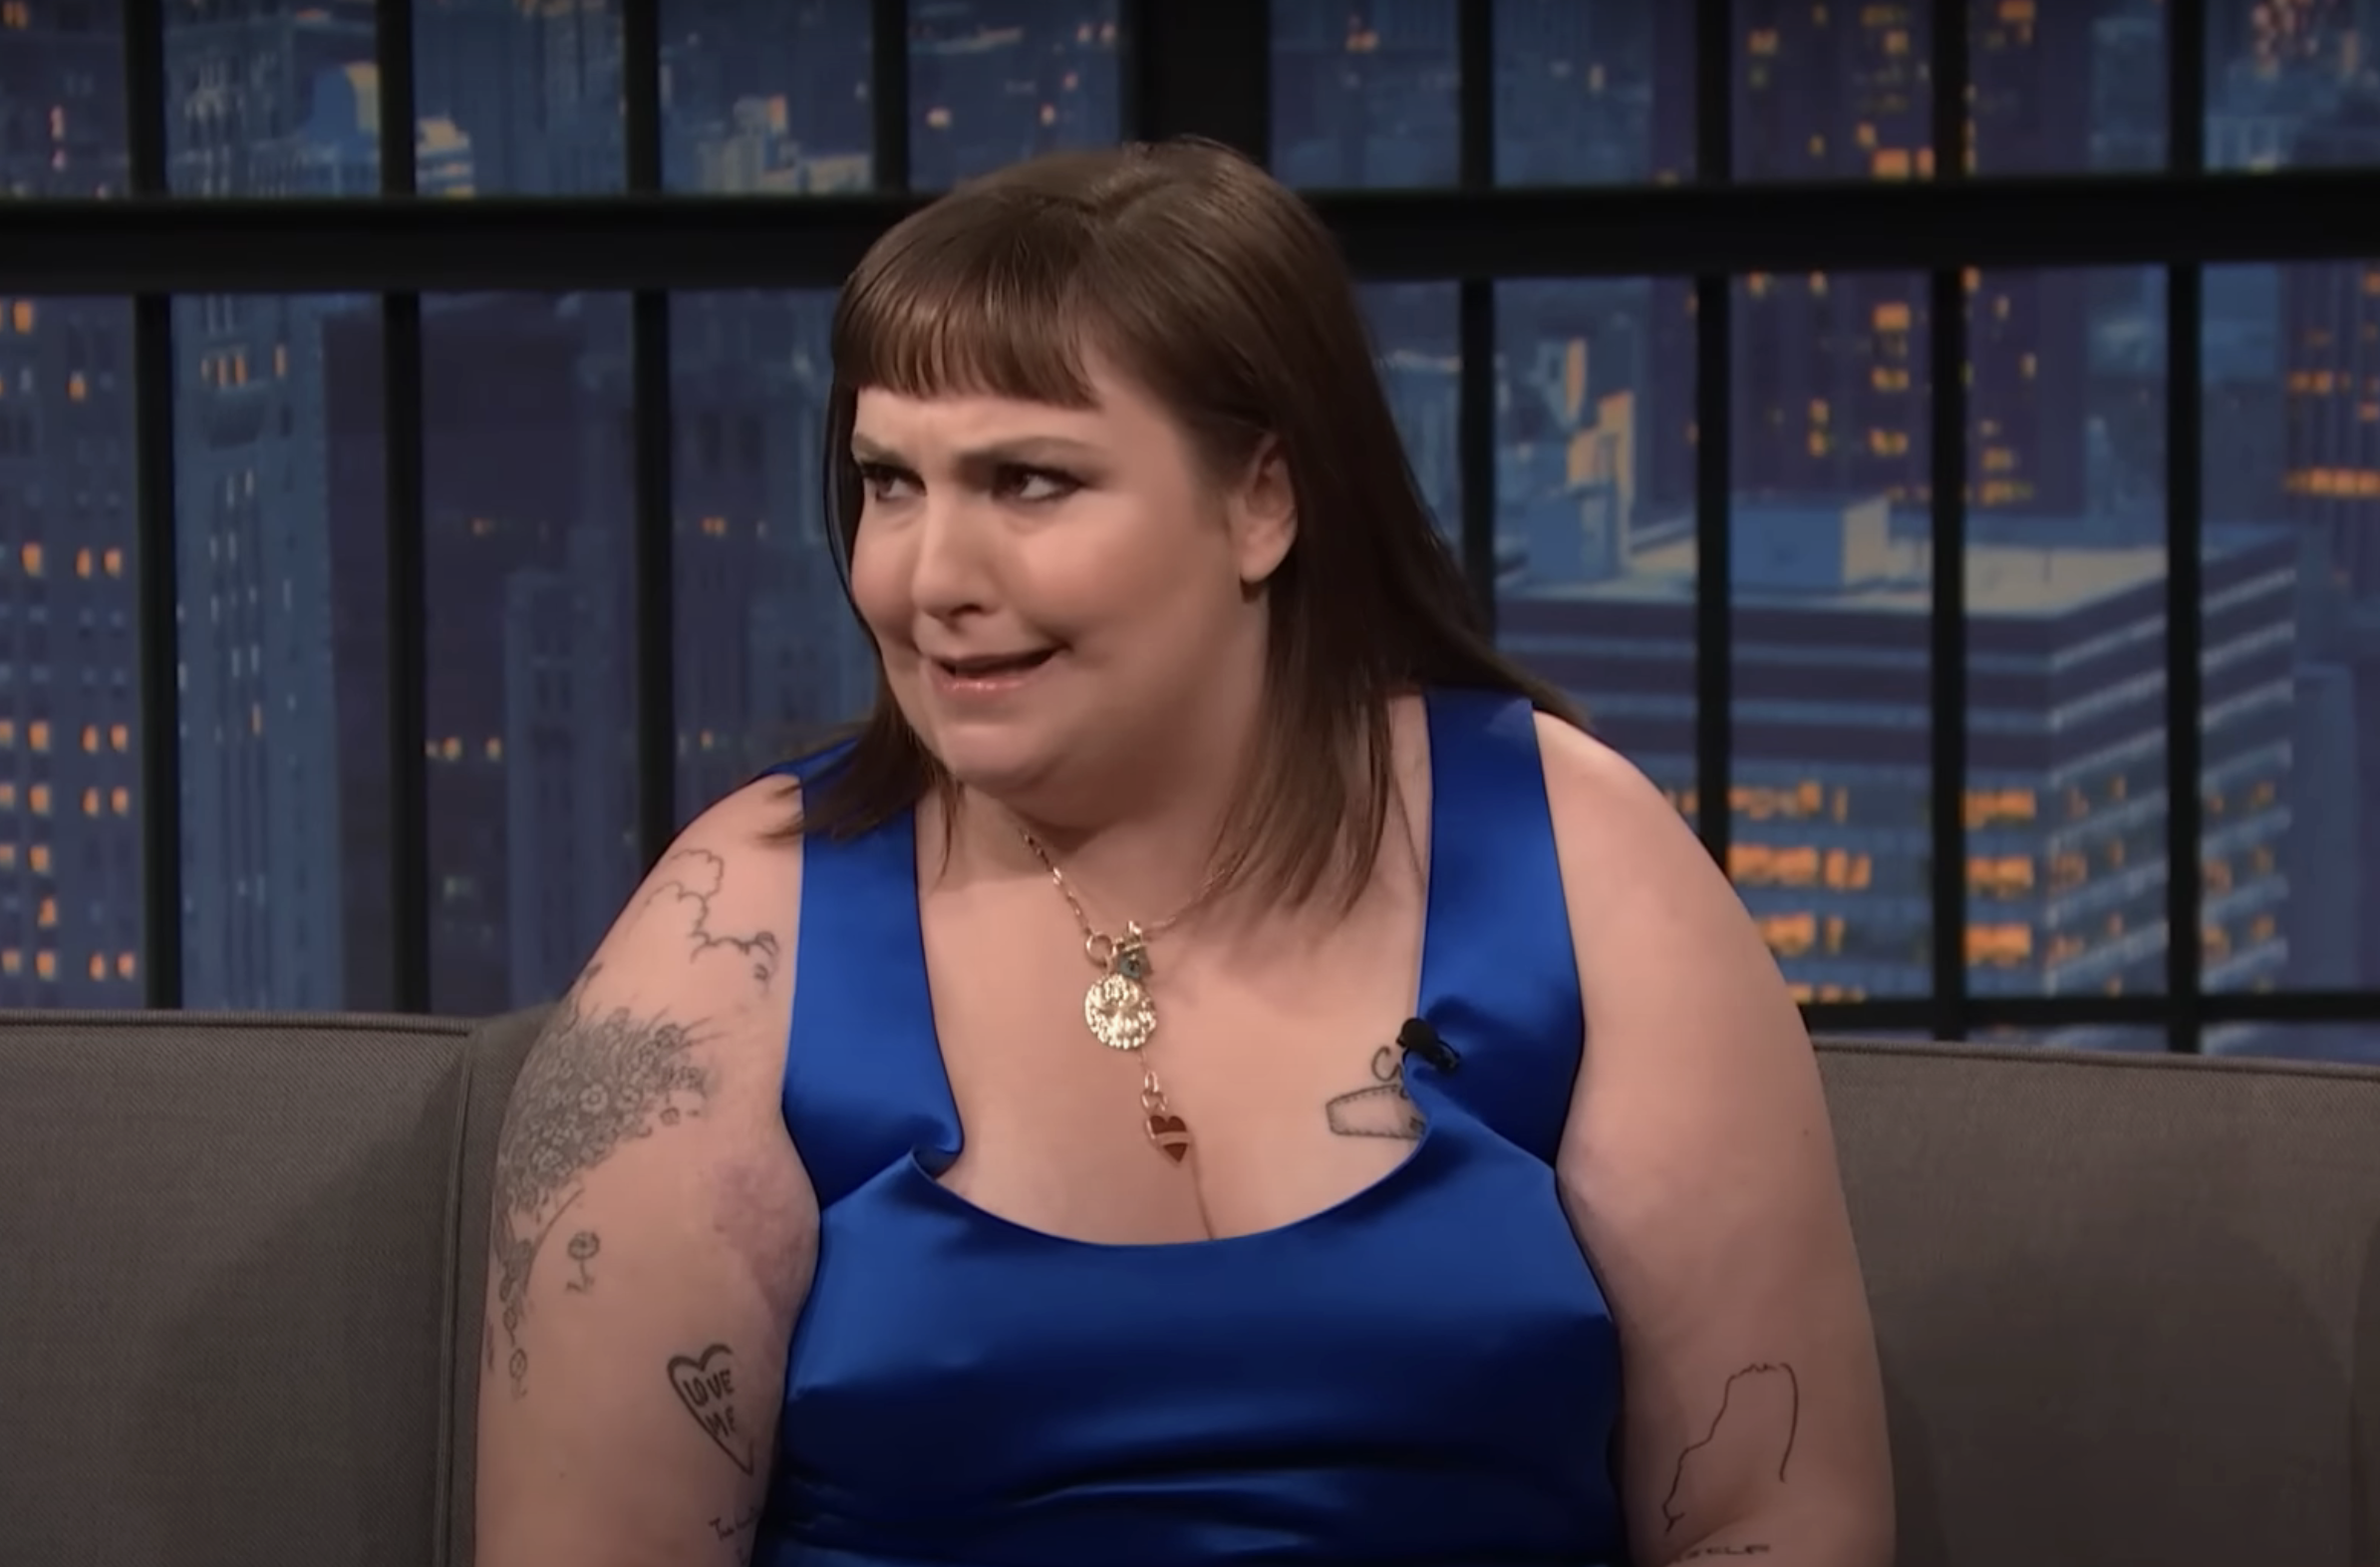 Lena in a sleeveless dress and necklace on talk show, tattoos on arms, smiling